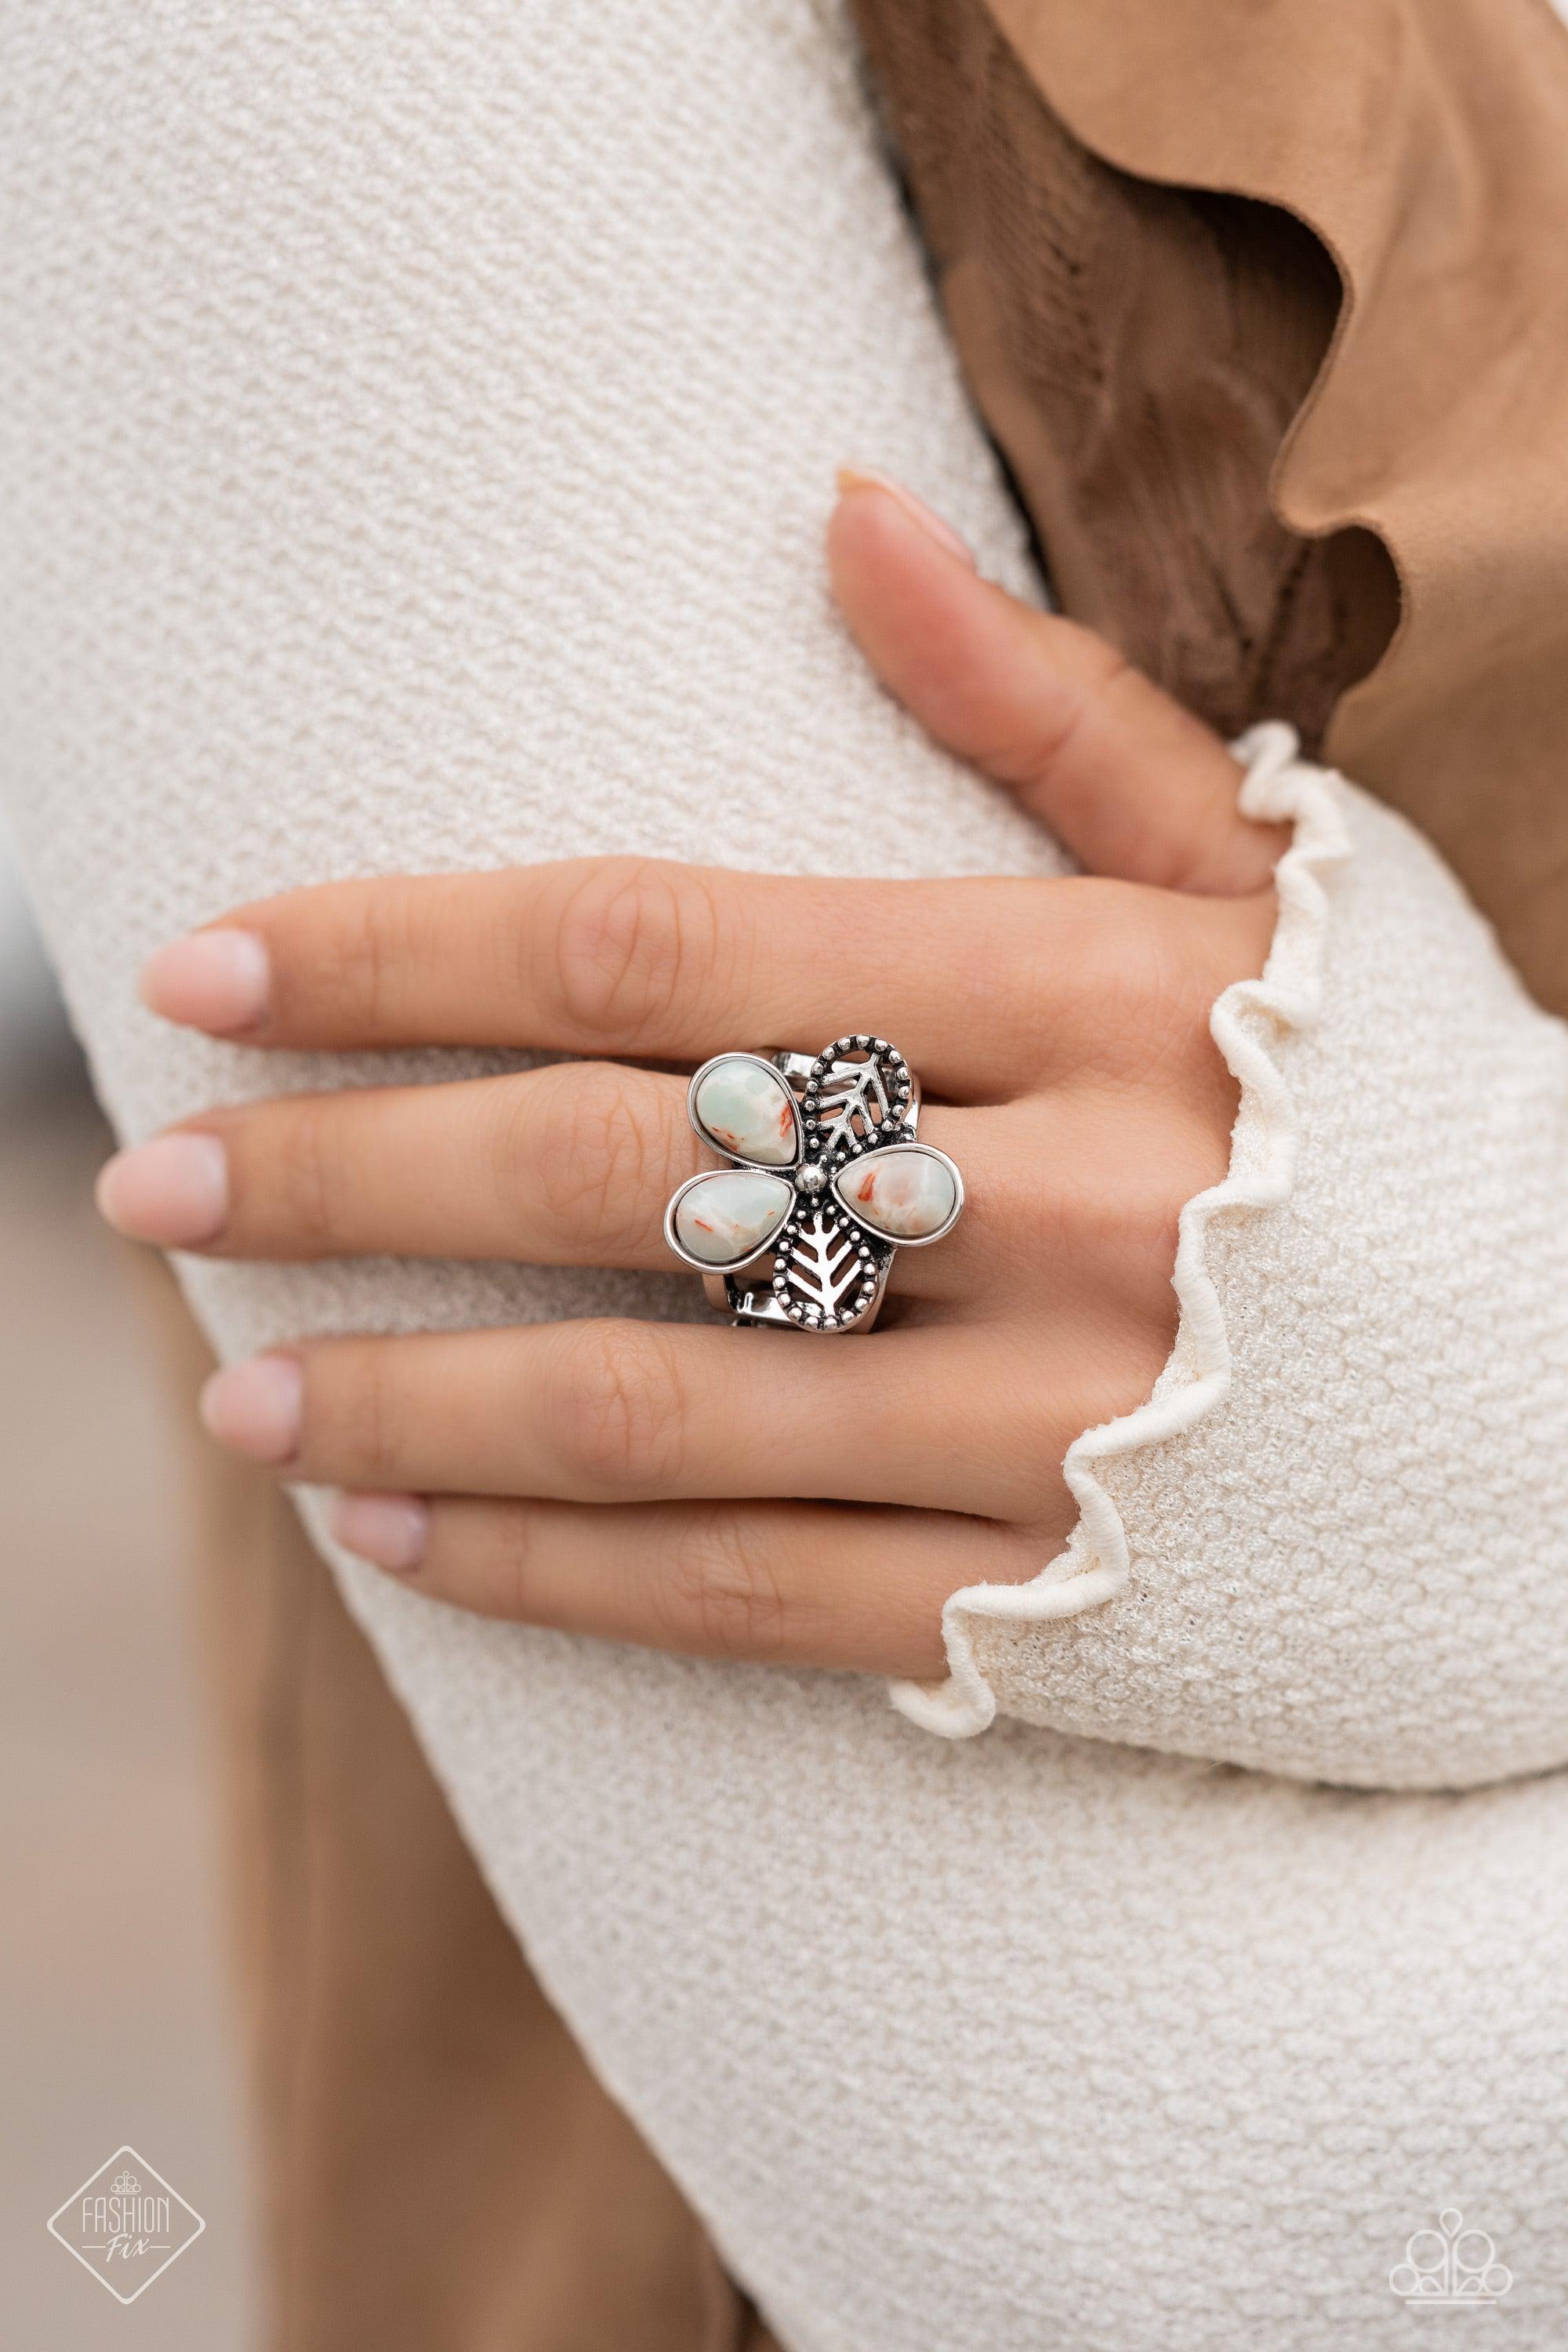 Free-Spirited Formal Blue Stone Flower Ring - Paparazzi Accessories- lightbox - CarasShop.com - $5 Jewelry by Cara Jewels